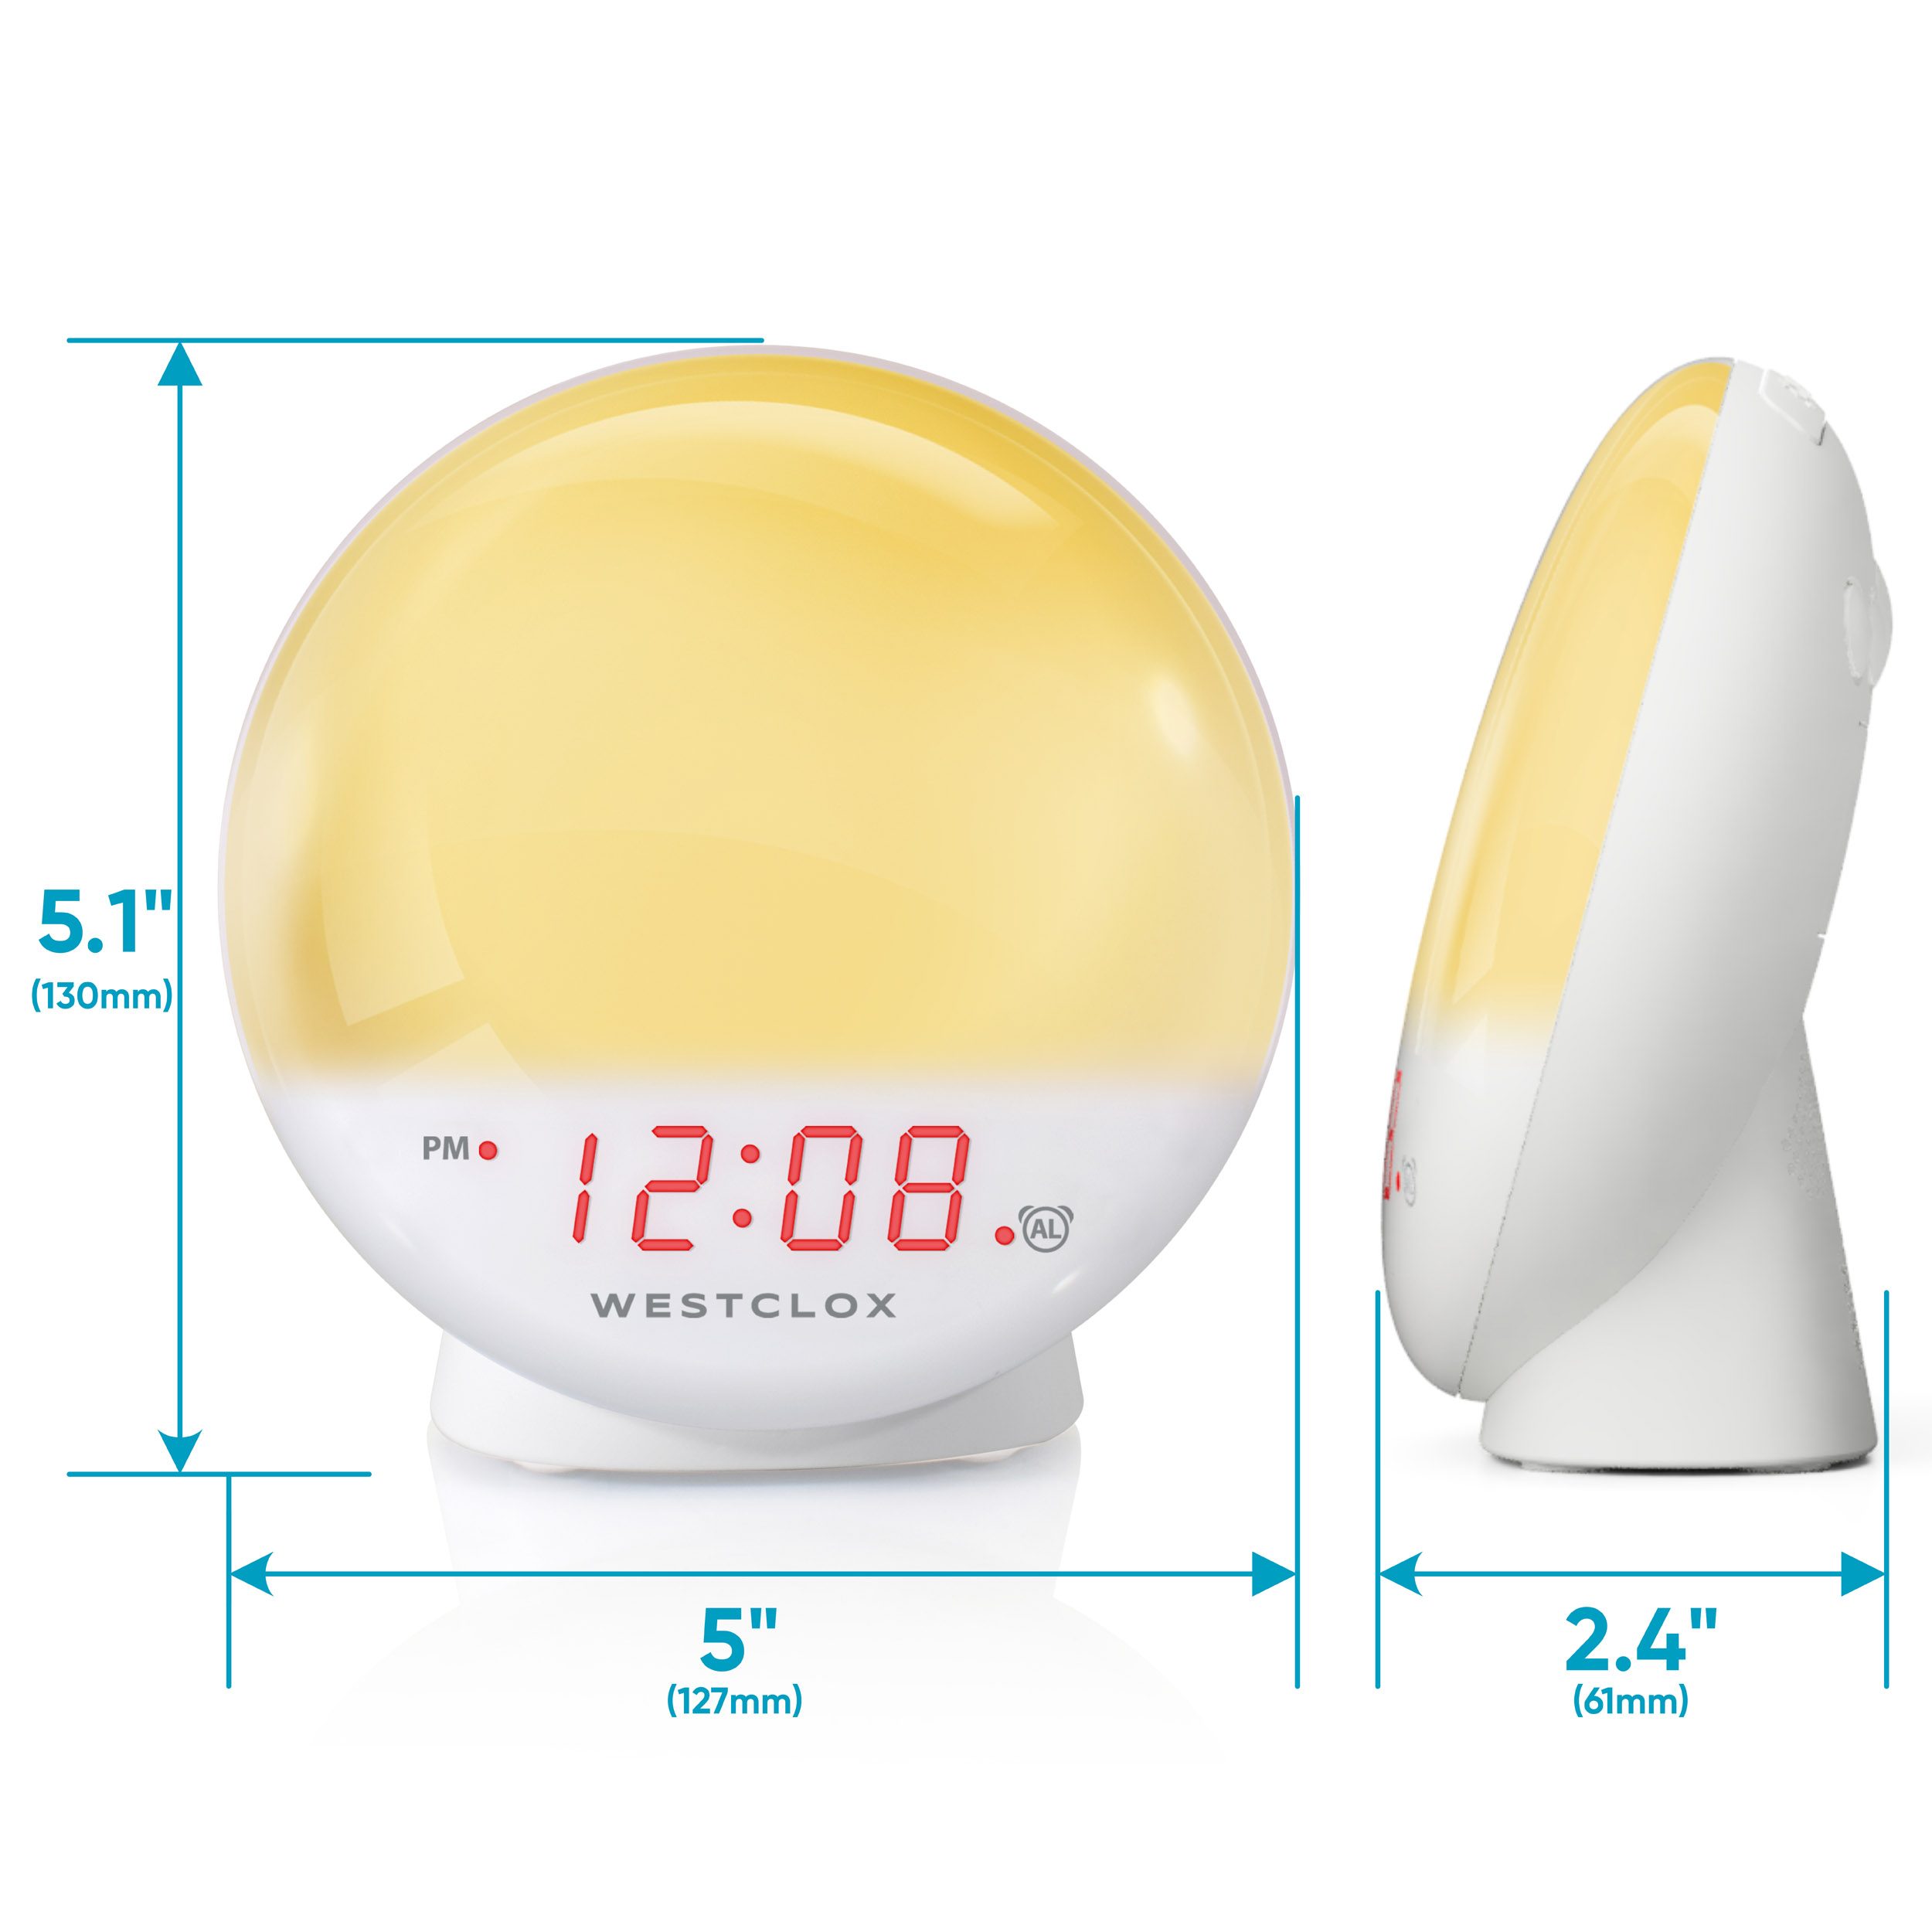 Westclox 5" White Electric Sunrise Simulator Alarm Clock with Digital LED Display and Dimmable Nightlight - image 5 of 10